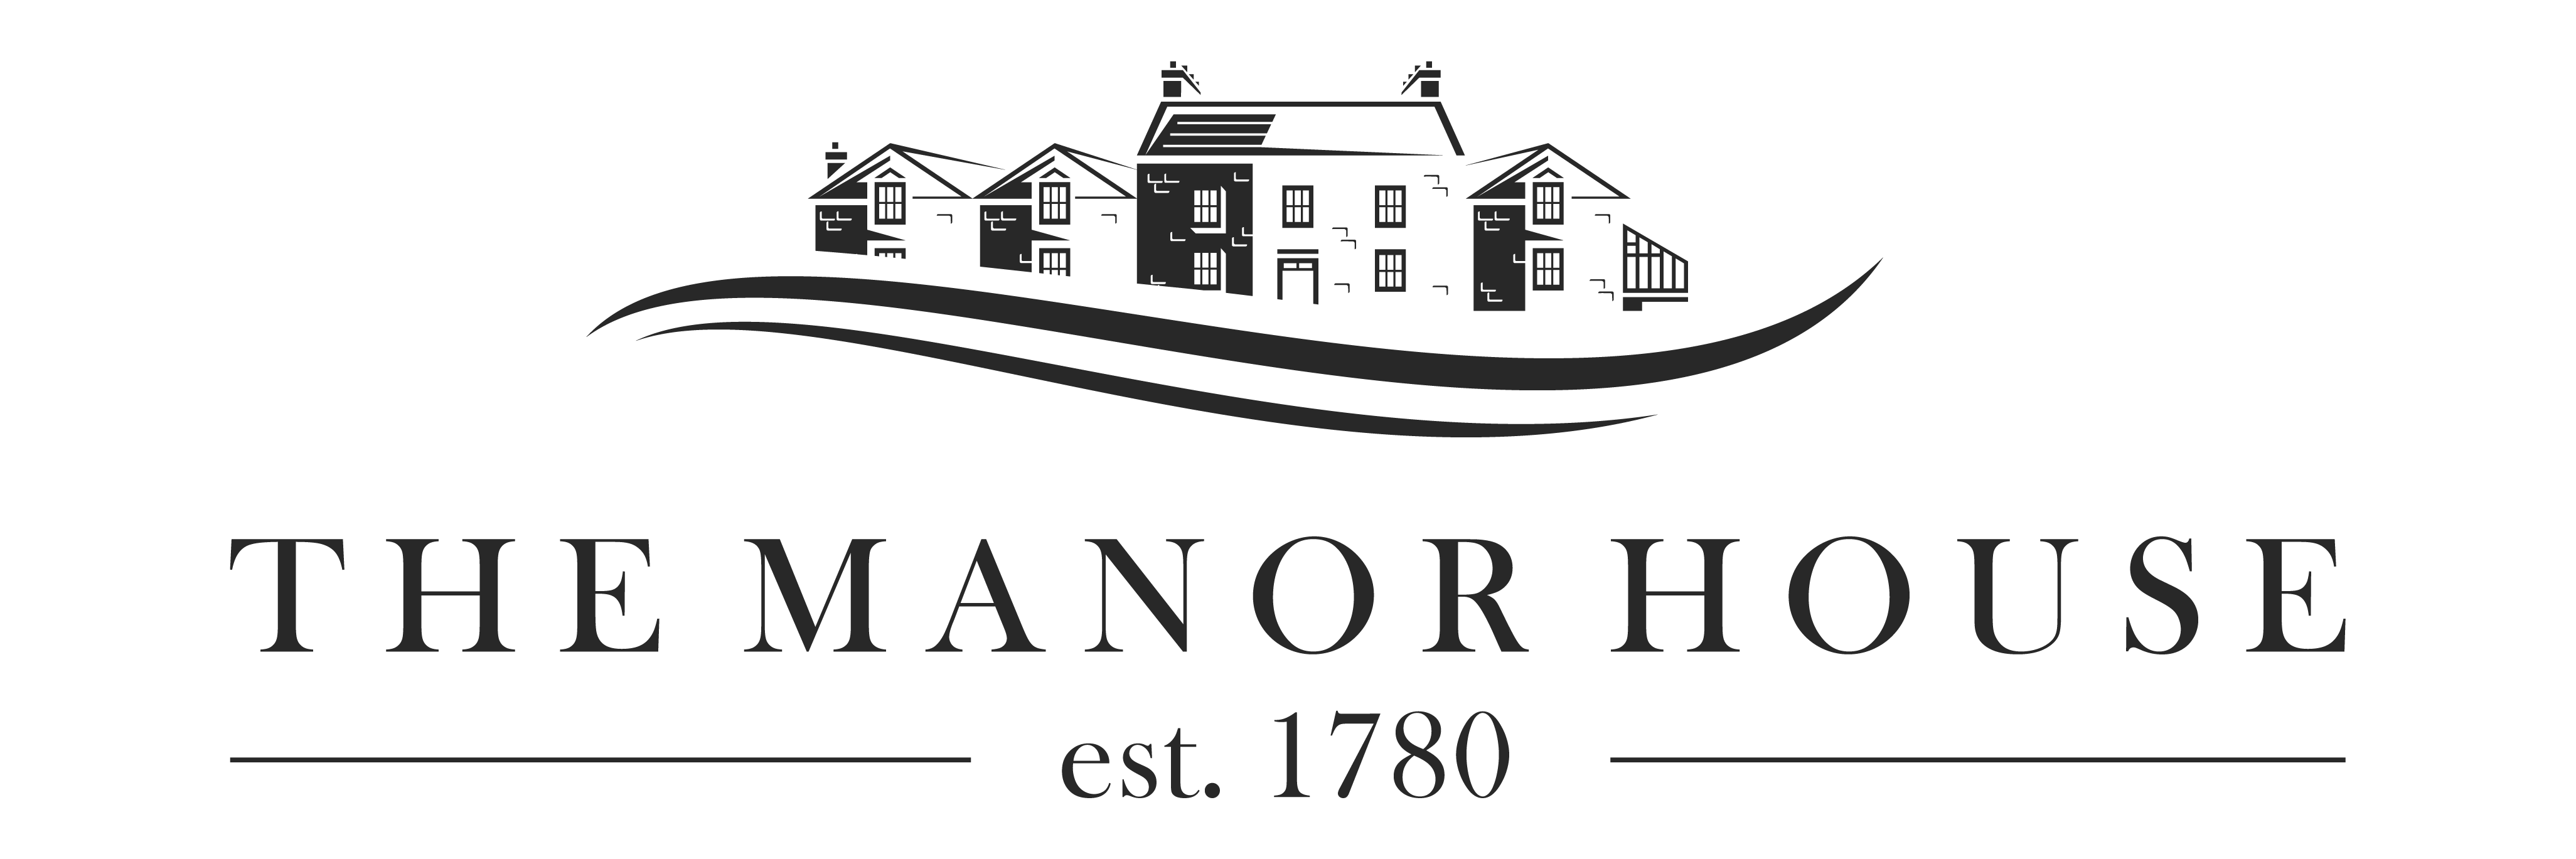 cropped-The-Manor-House-Original-Layout-Greyscale.png